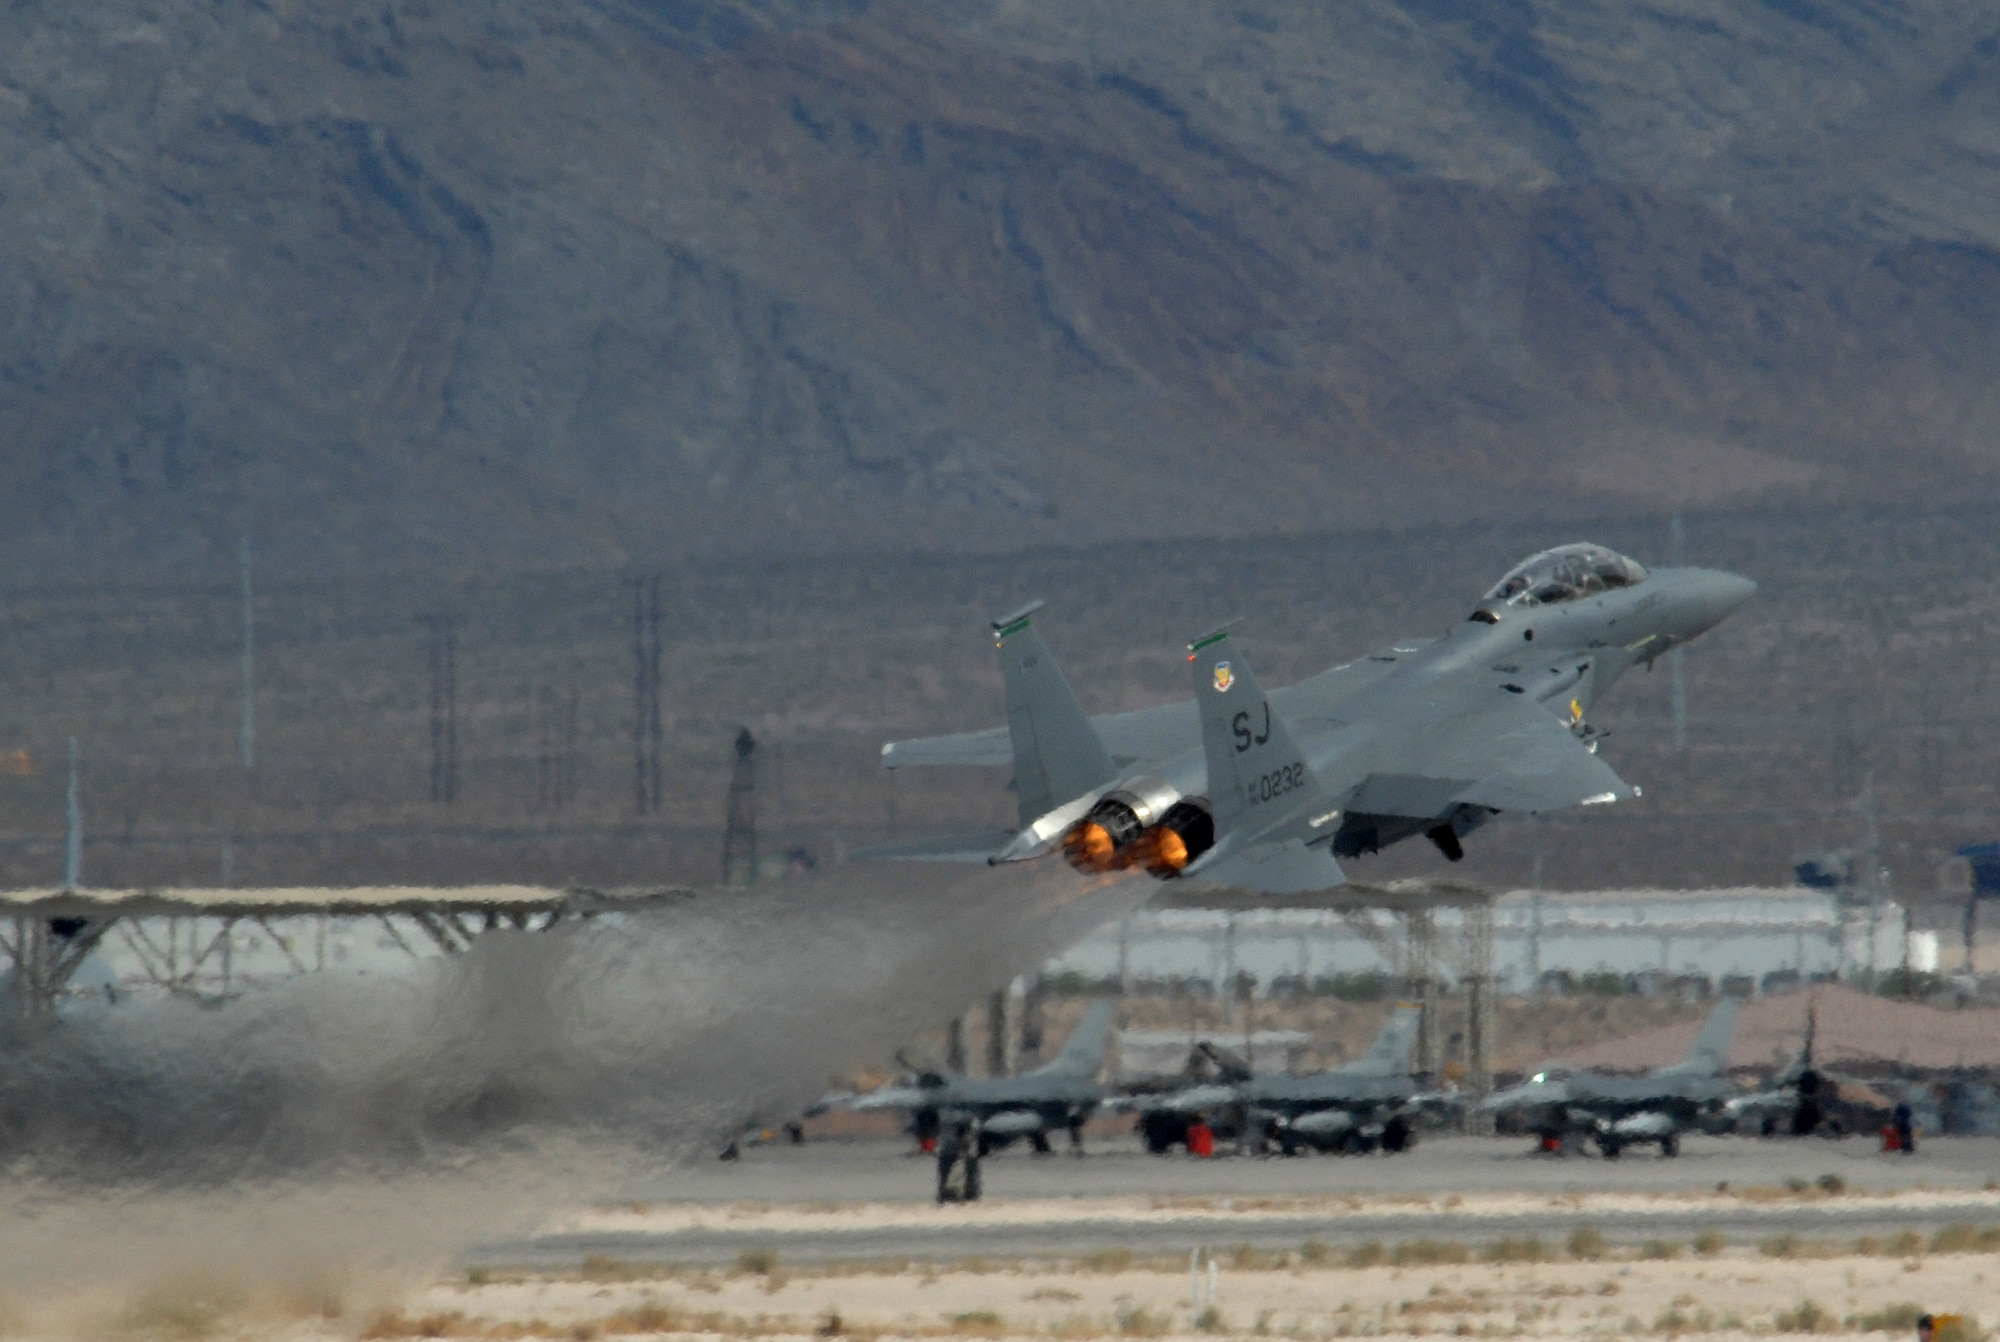 An F-15E Strike Eagle, takes off during Exercise Green Flag April 24 at Nellis Air Force Base, Nev. Green Flag is an Air Combat Command pre-deployment exercise for units who perform close-air support. The training exercise, which began April 19 and runs through May 4, mirrors many of the irregular warfare-conditions the aircrews will see while fighting the war on terrorism. During Green Flag, aircrews will try to learn better ways to employ airpower within an irregular warfare environment. The F-15E is from Seymor Johnson AFB, N.C. (U.S. Air Force photo/Master Sgt. Kevin J. Gruenwald)
